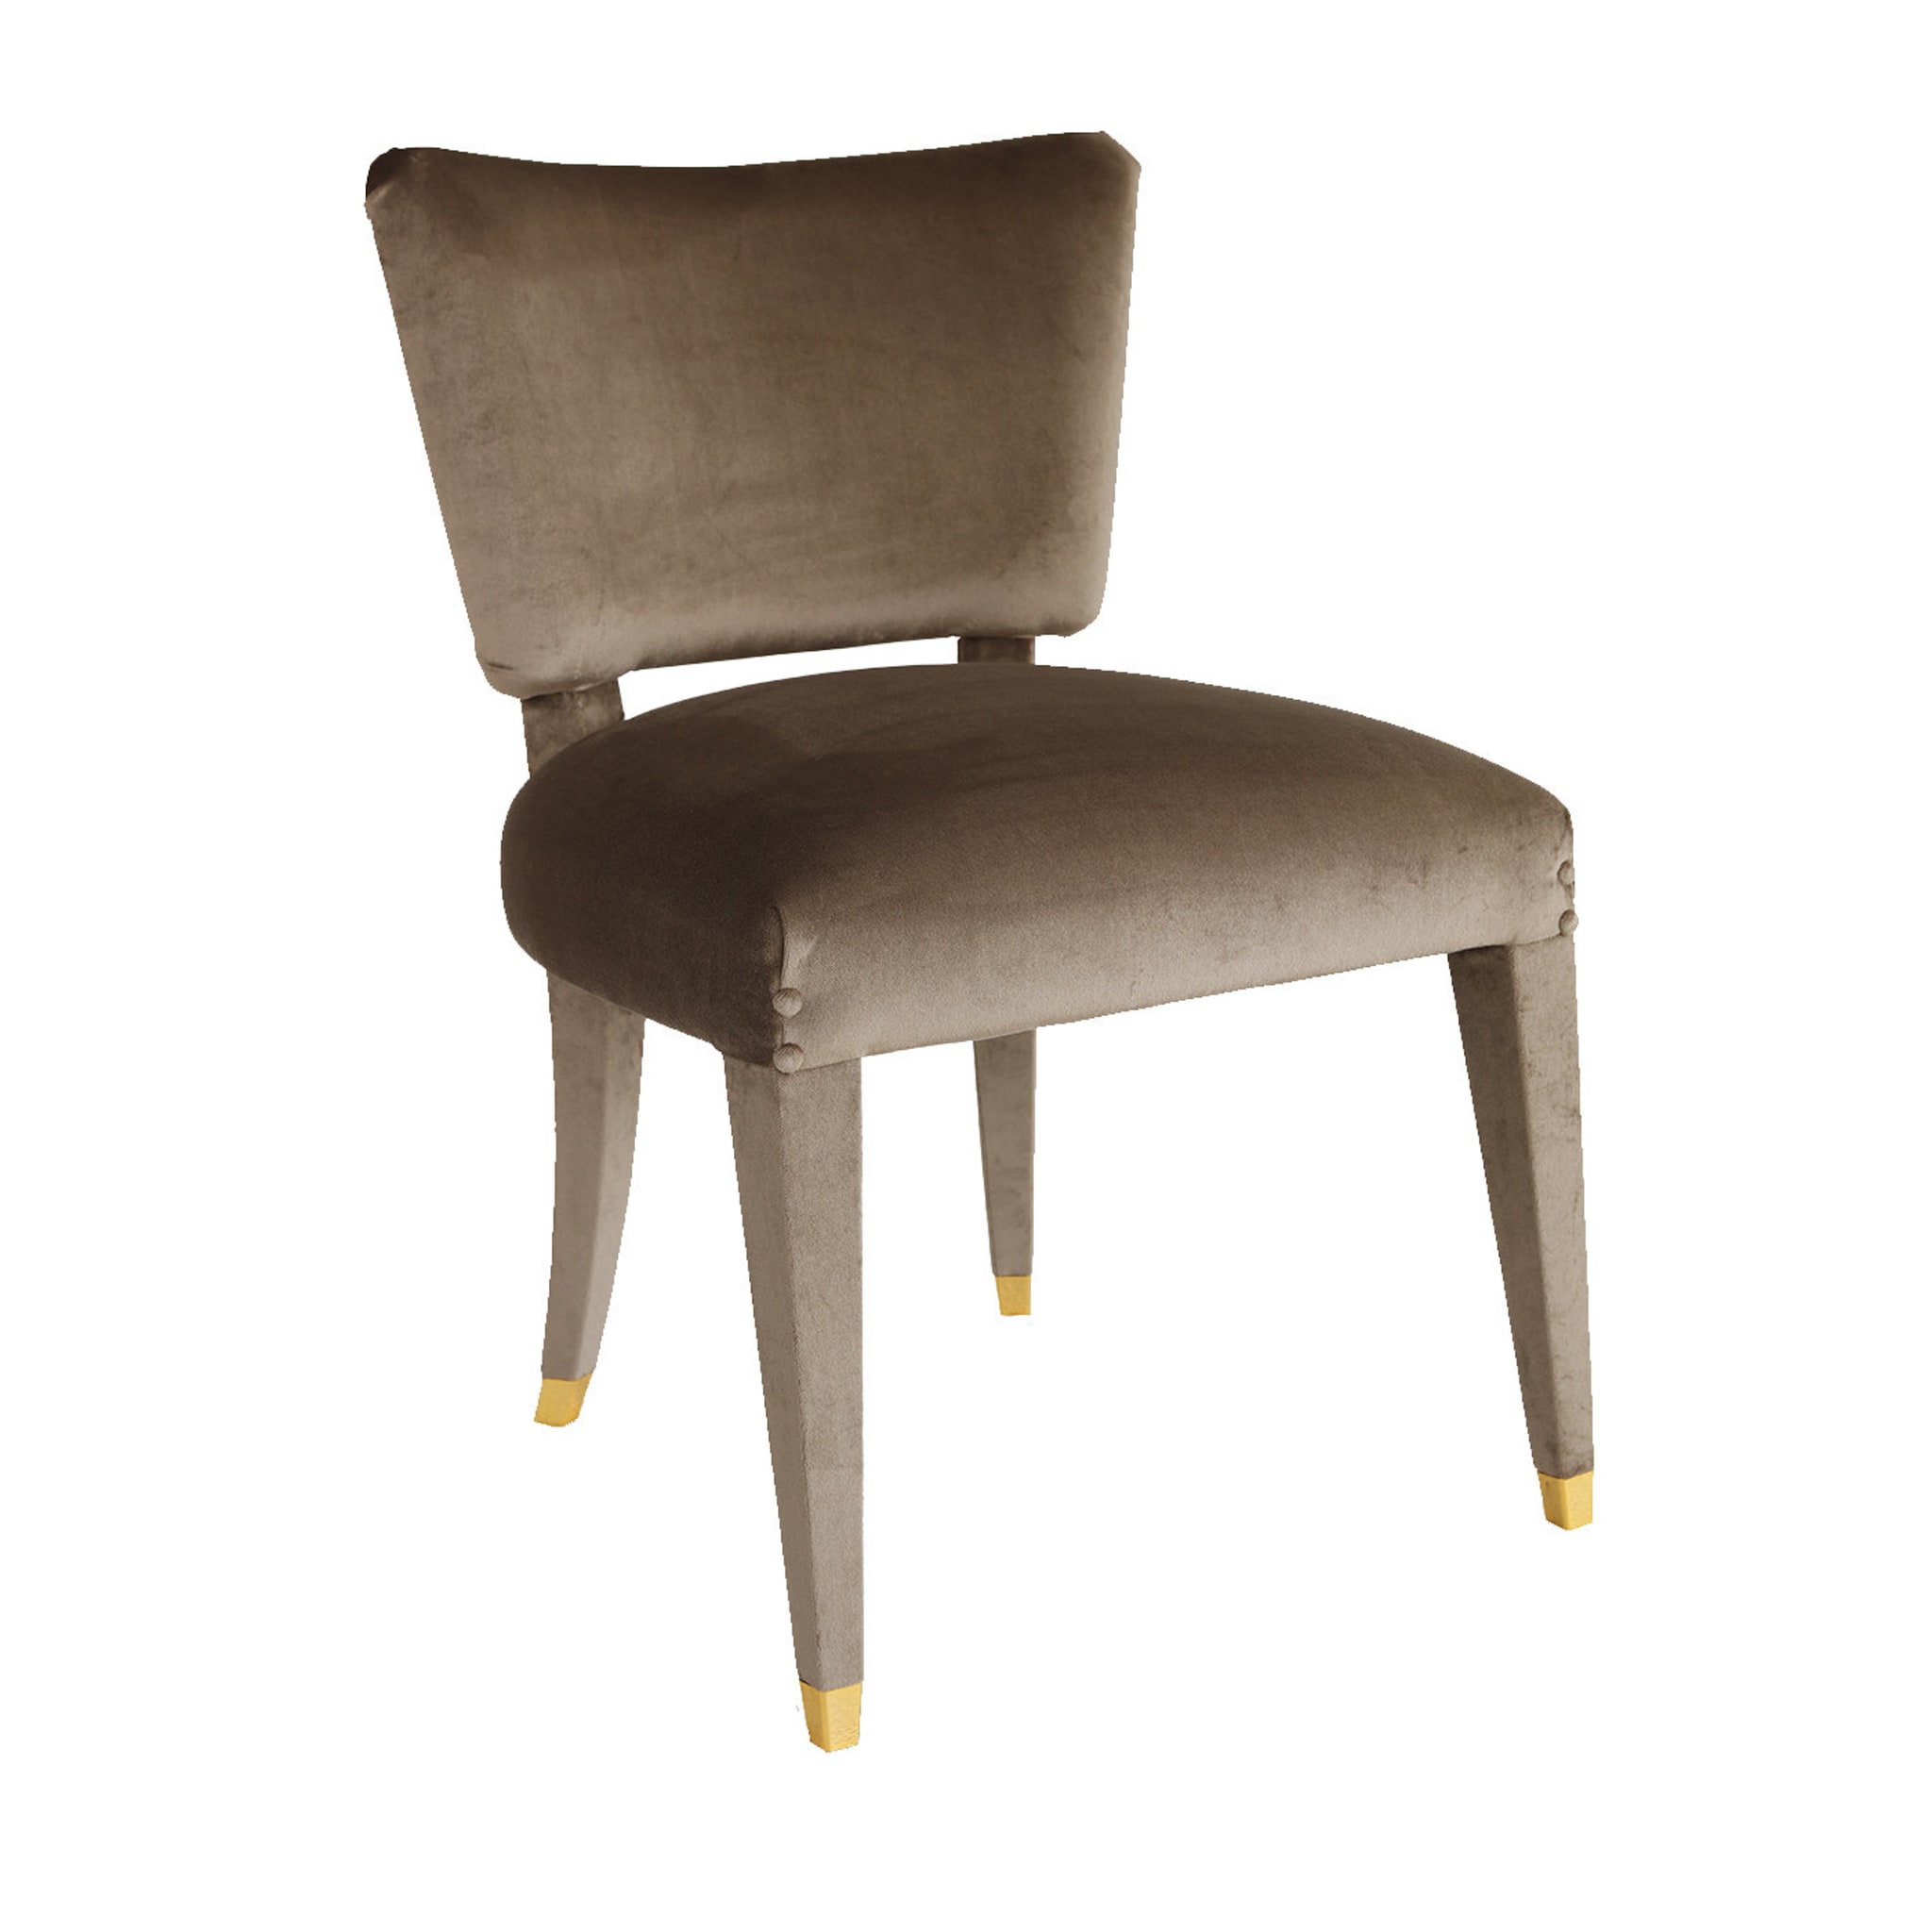 Class Brown Dining Chair #1 - Main view